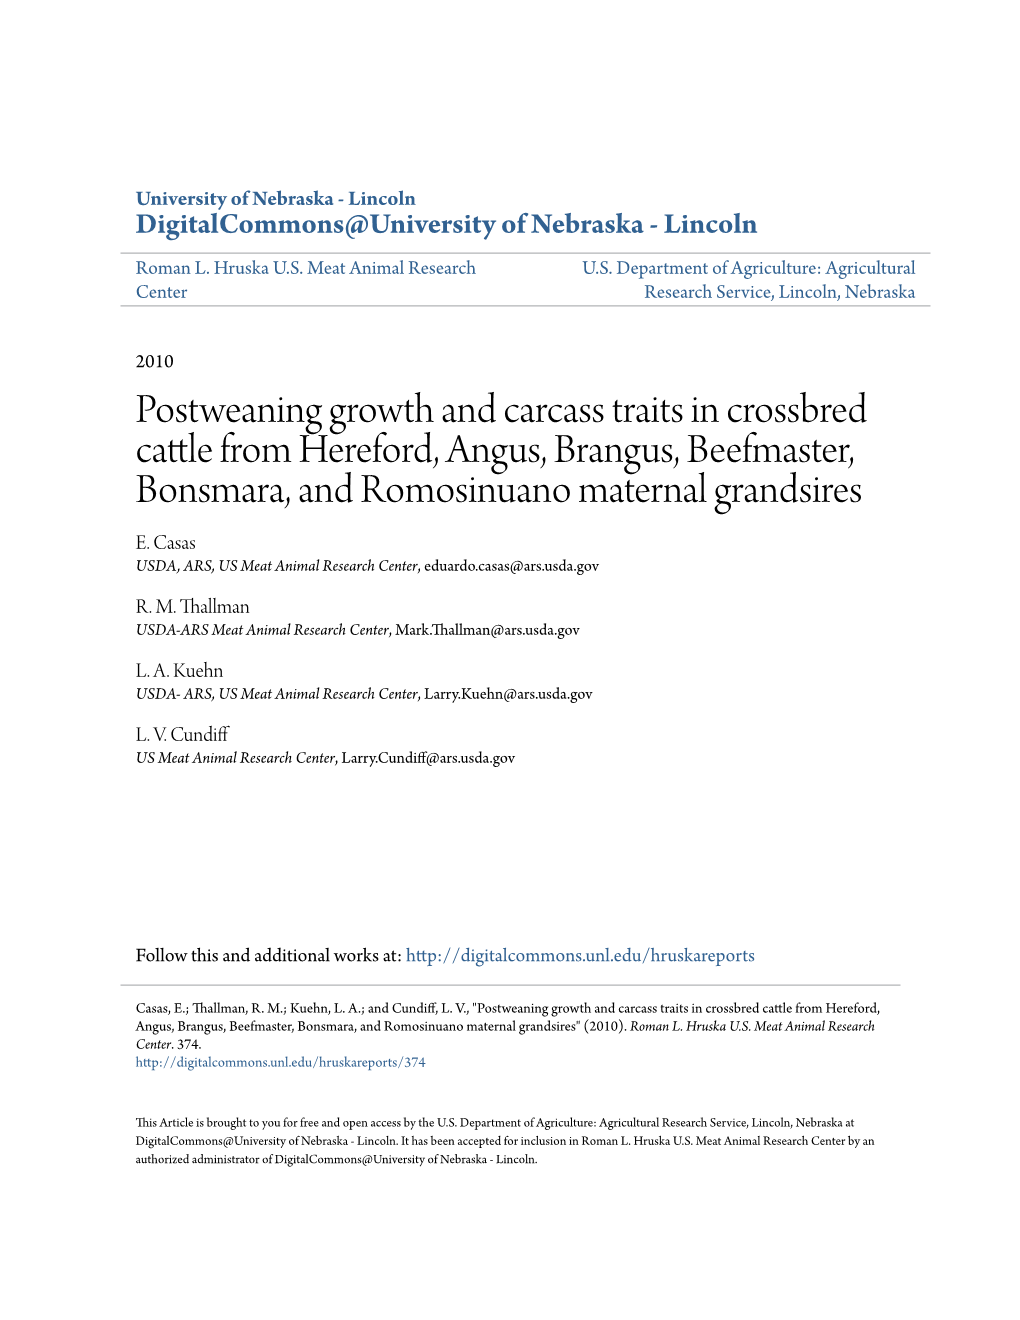 Postweaning Growth and Carcass Traits in Crossbred Cattle from Hereford, Angus, Brangus, Beefmaster, Bonsmara, and Romosinuano Maternal Grandsires E